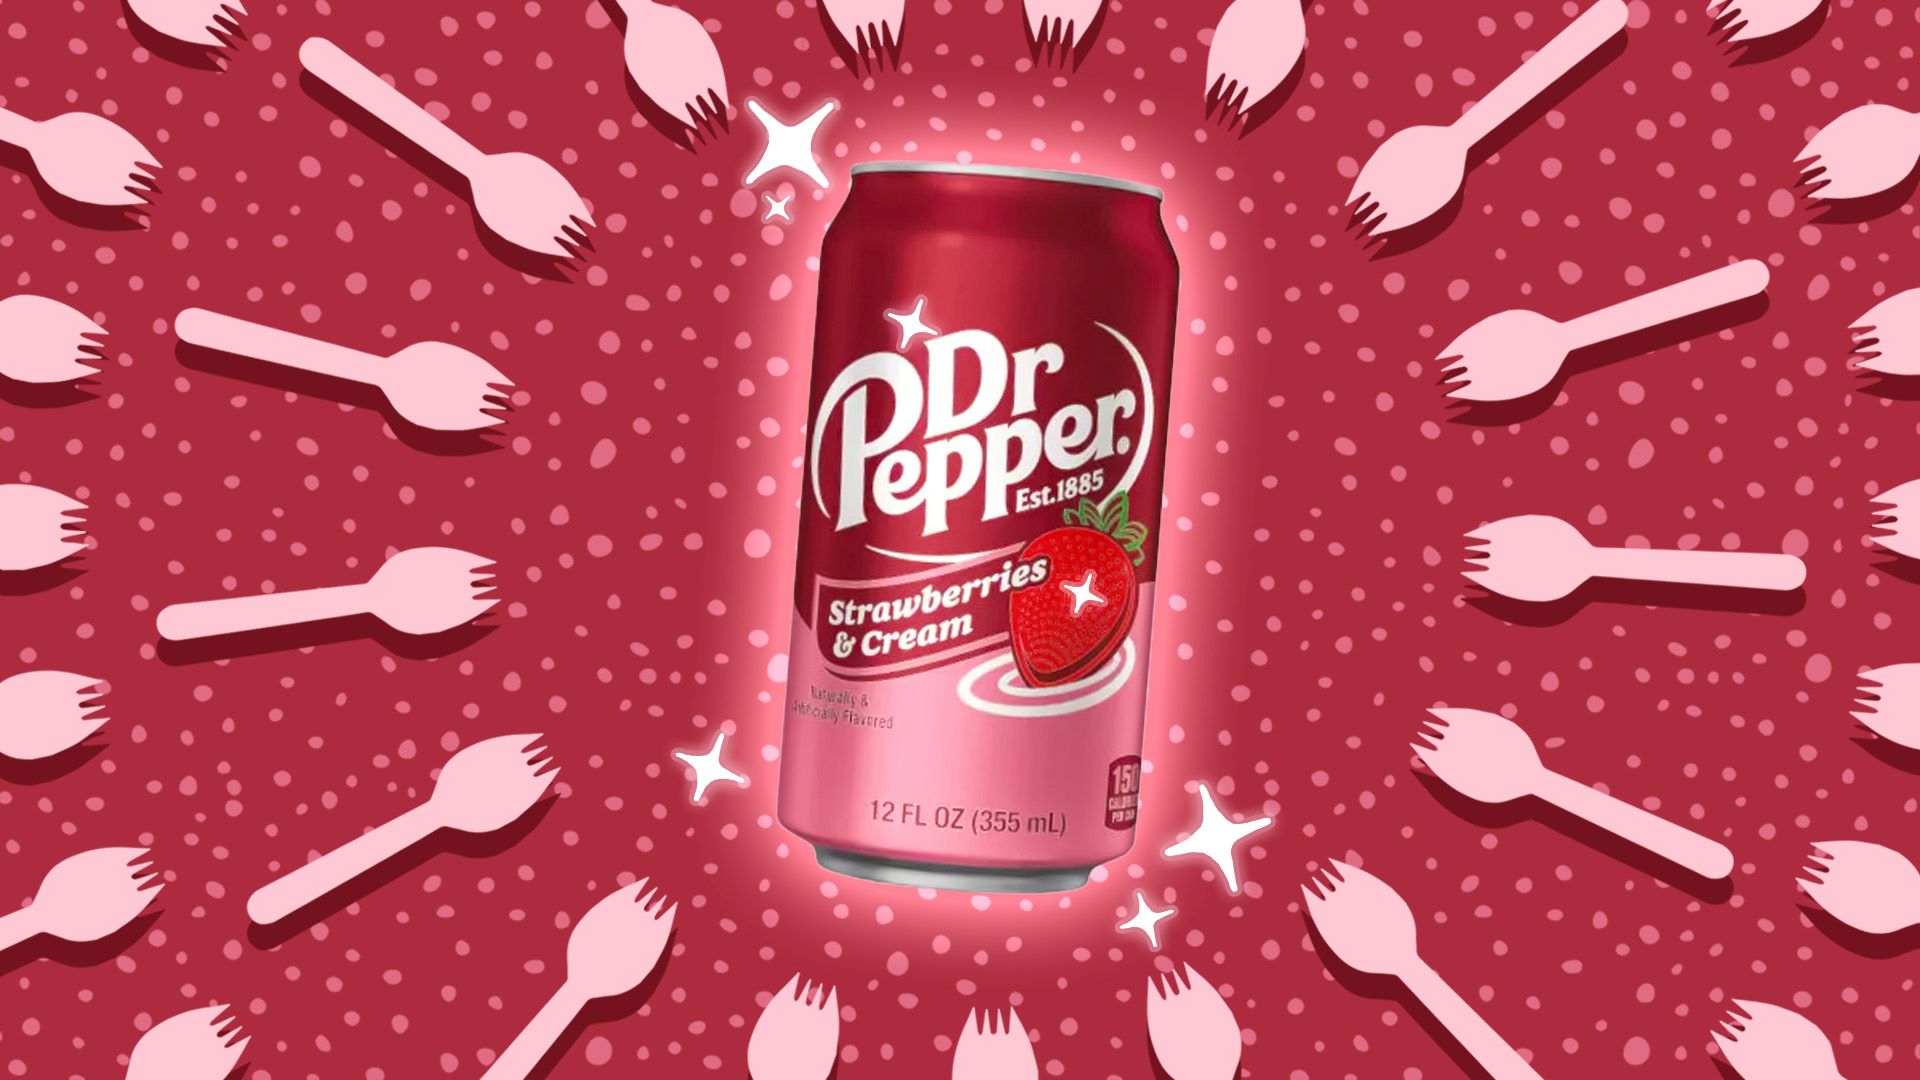 10-extraordinary-facts-about-dr-pepper-strawberries-and-cream